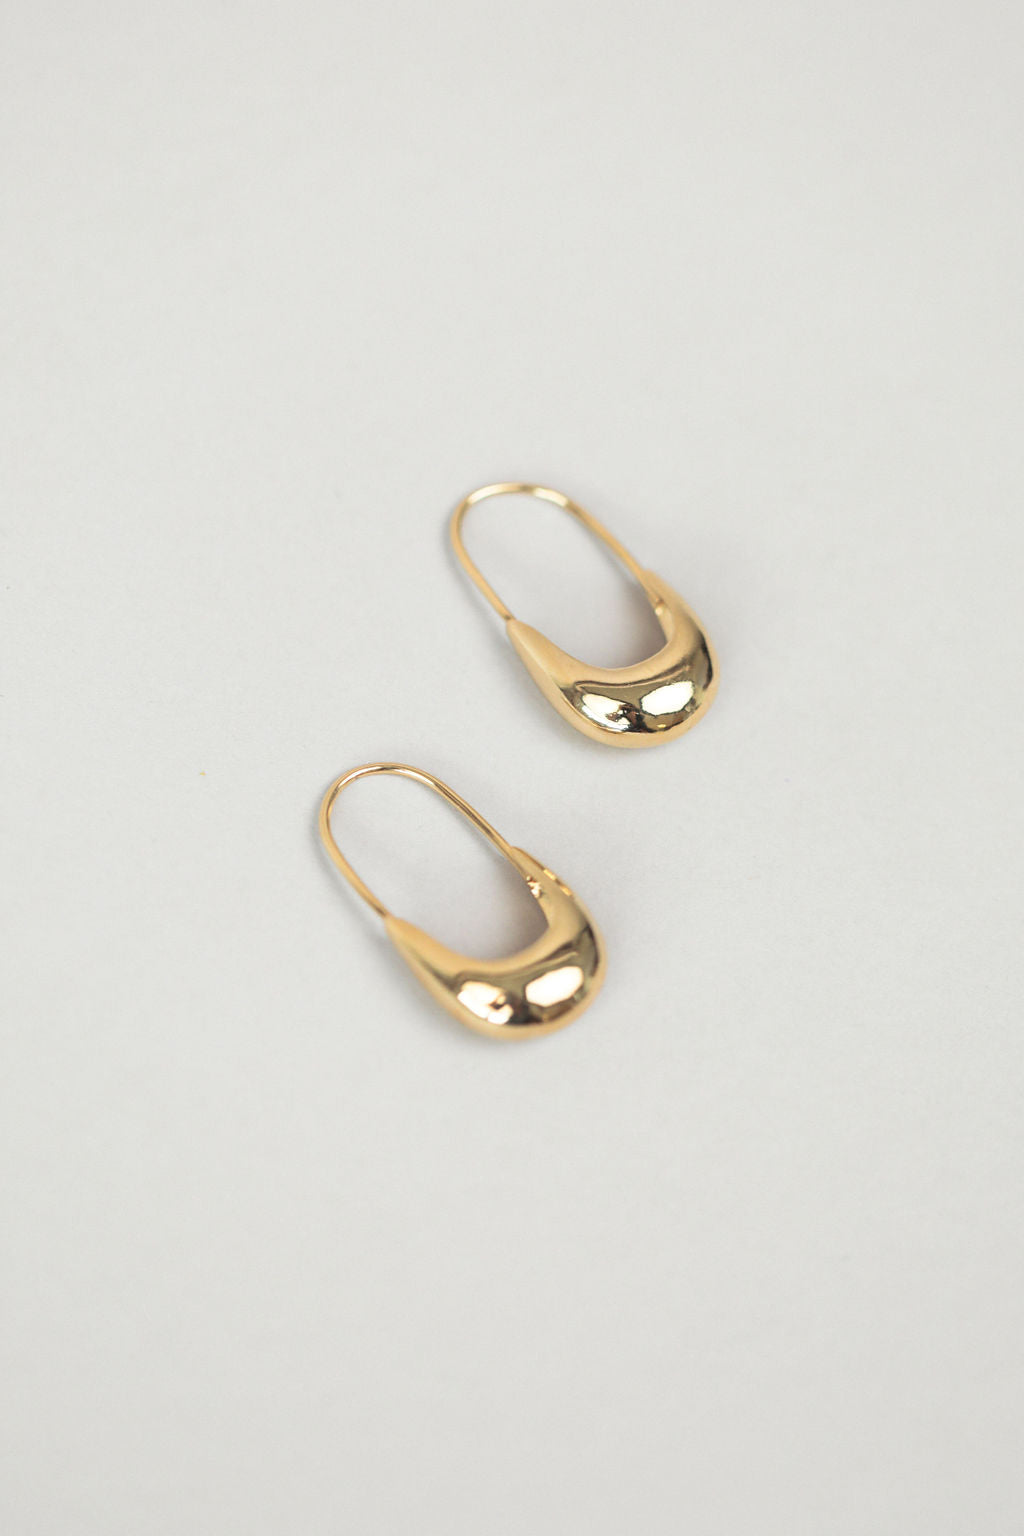 Wolf Circus Marta oval hoop earrings | PIPE AND ROW seattle boutique